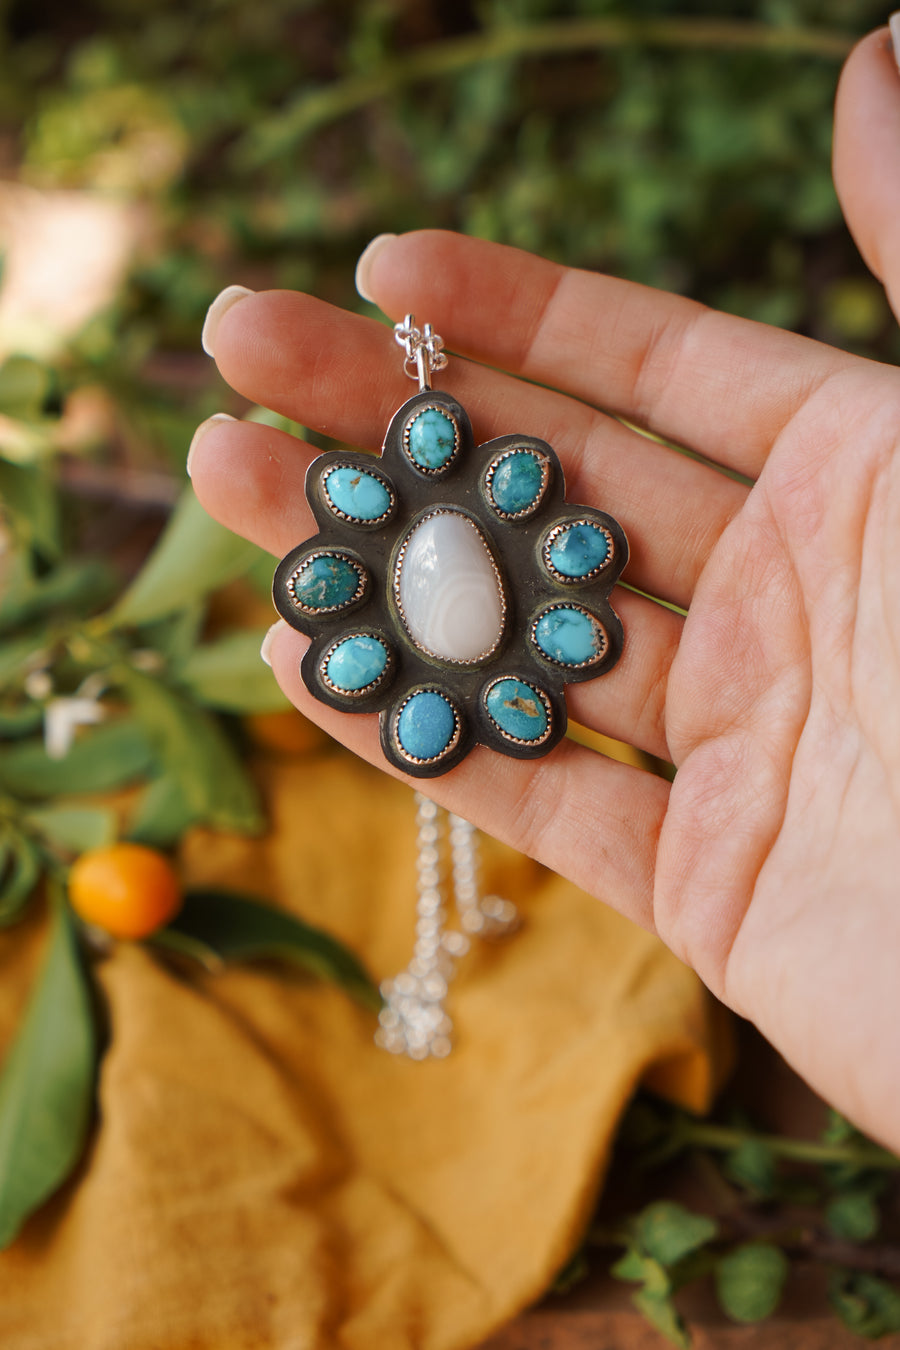 Agate and Blue Ridge Turquoise Statement Necklace